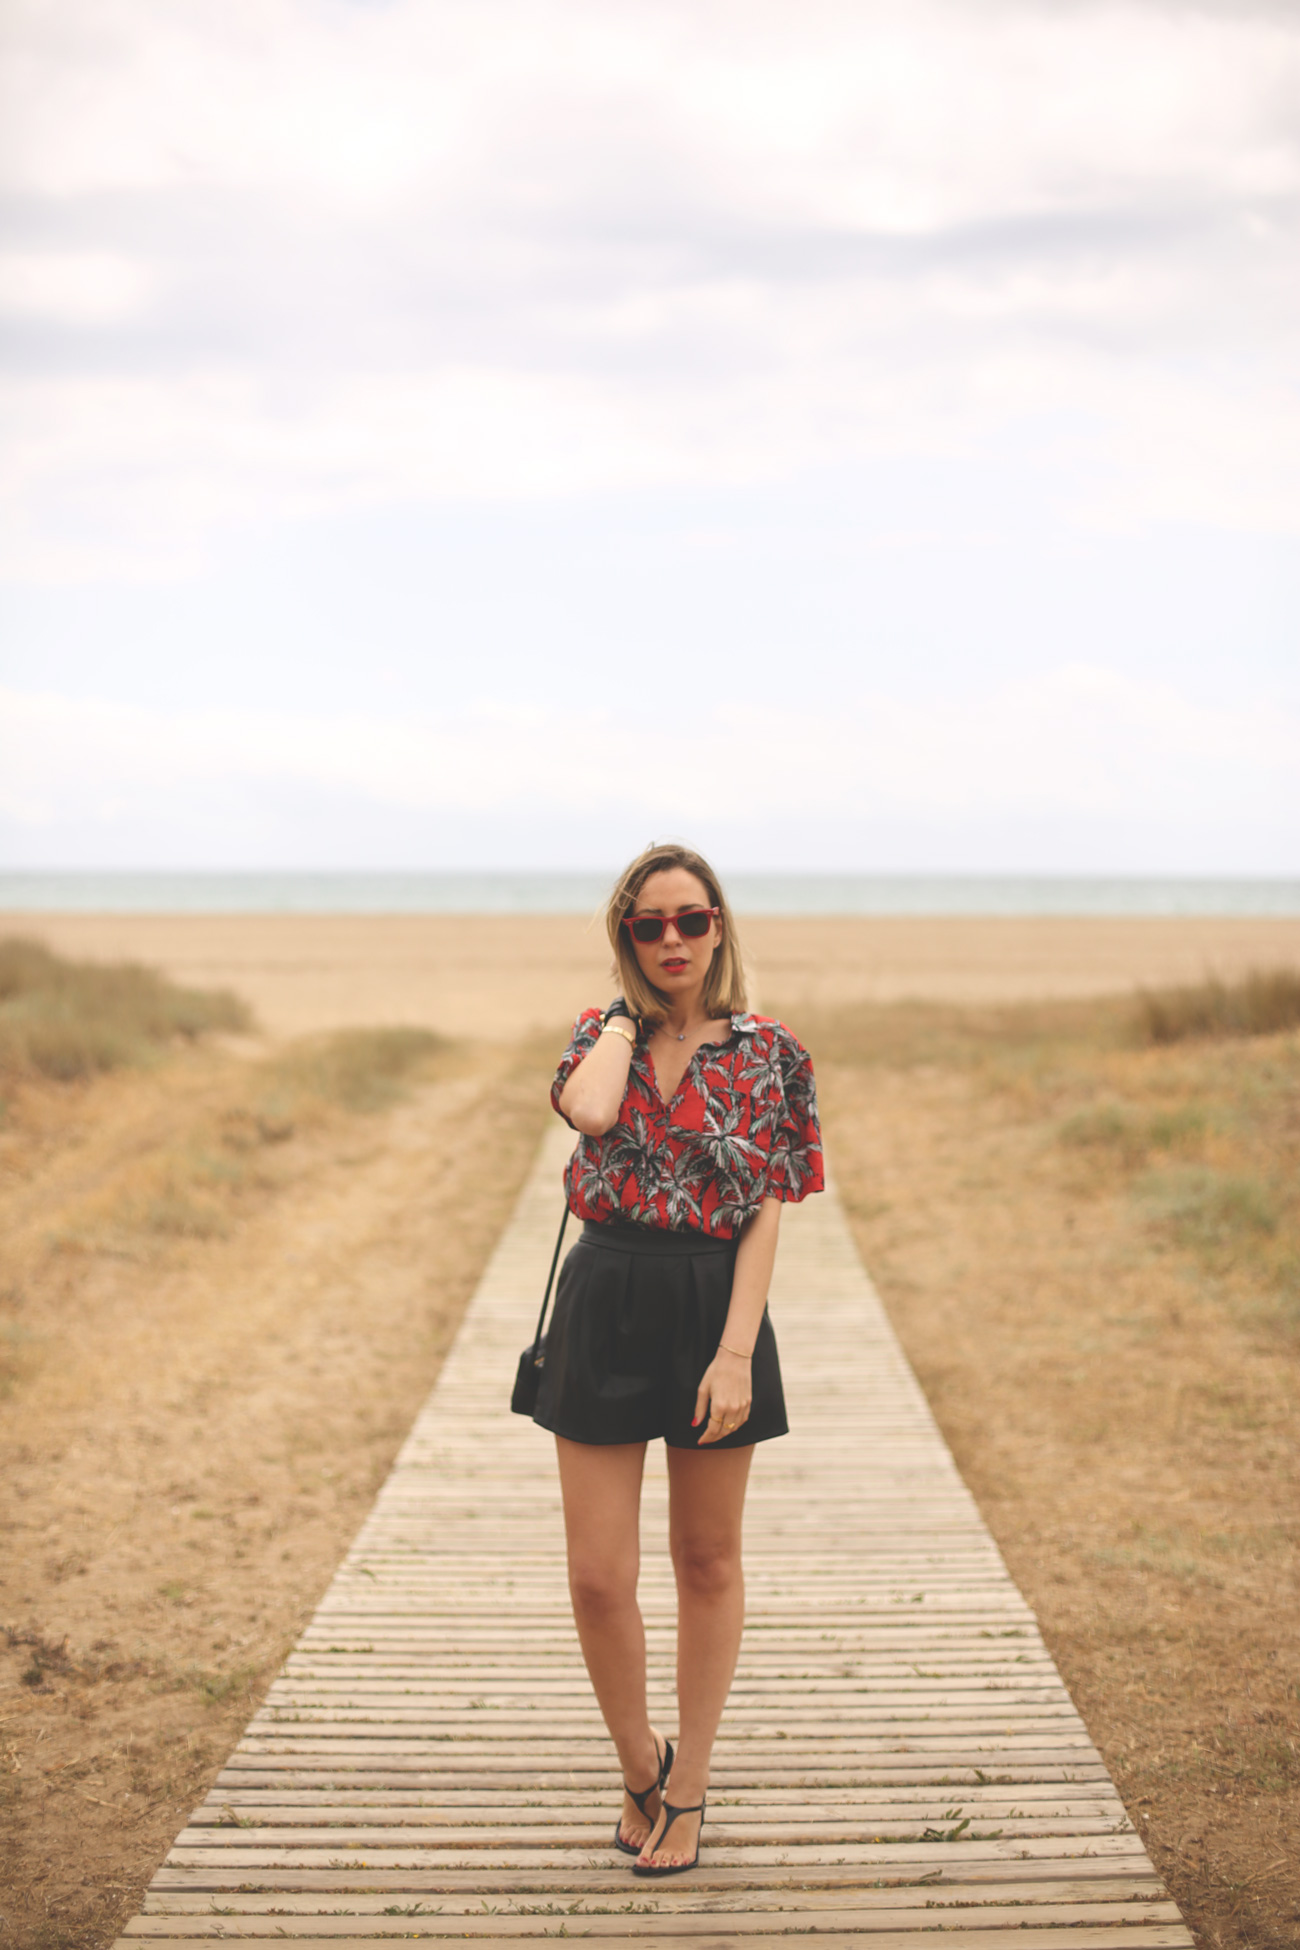 Palm print, leather shorts, high waist, balenciaga bracelet, swarovski, black and red, fashion, blogger, spring look, outfit, vince camuto, 338 on line,